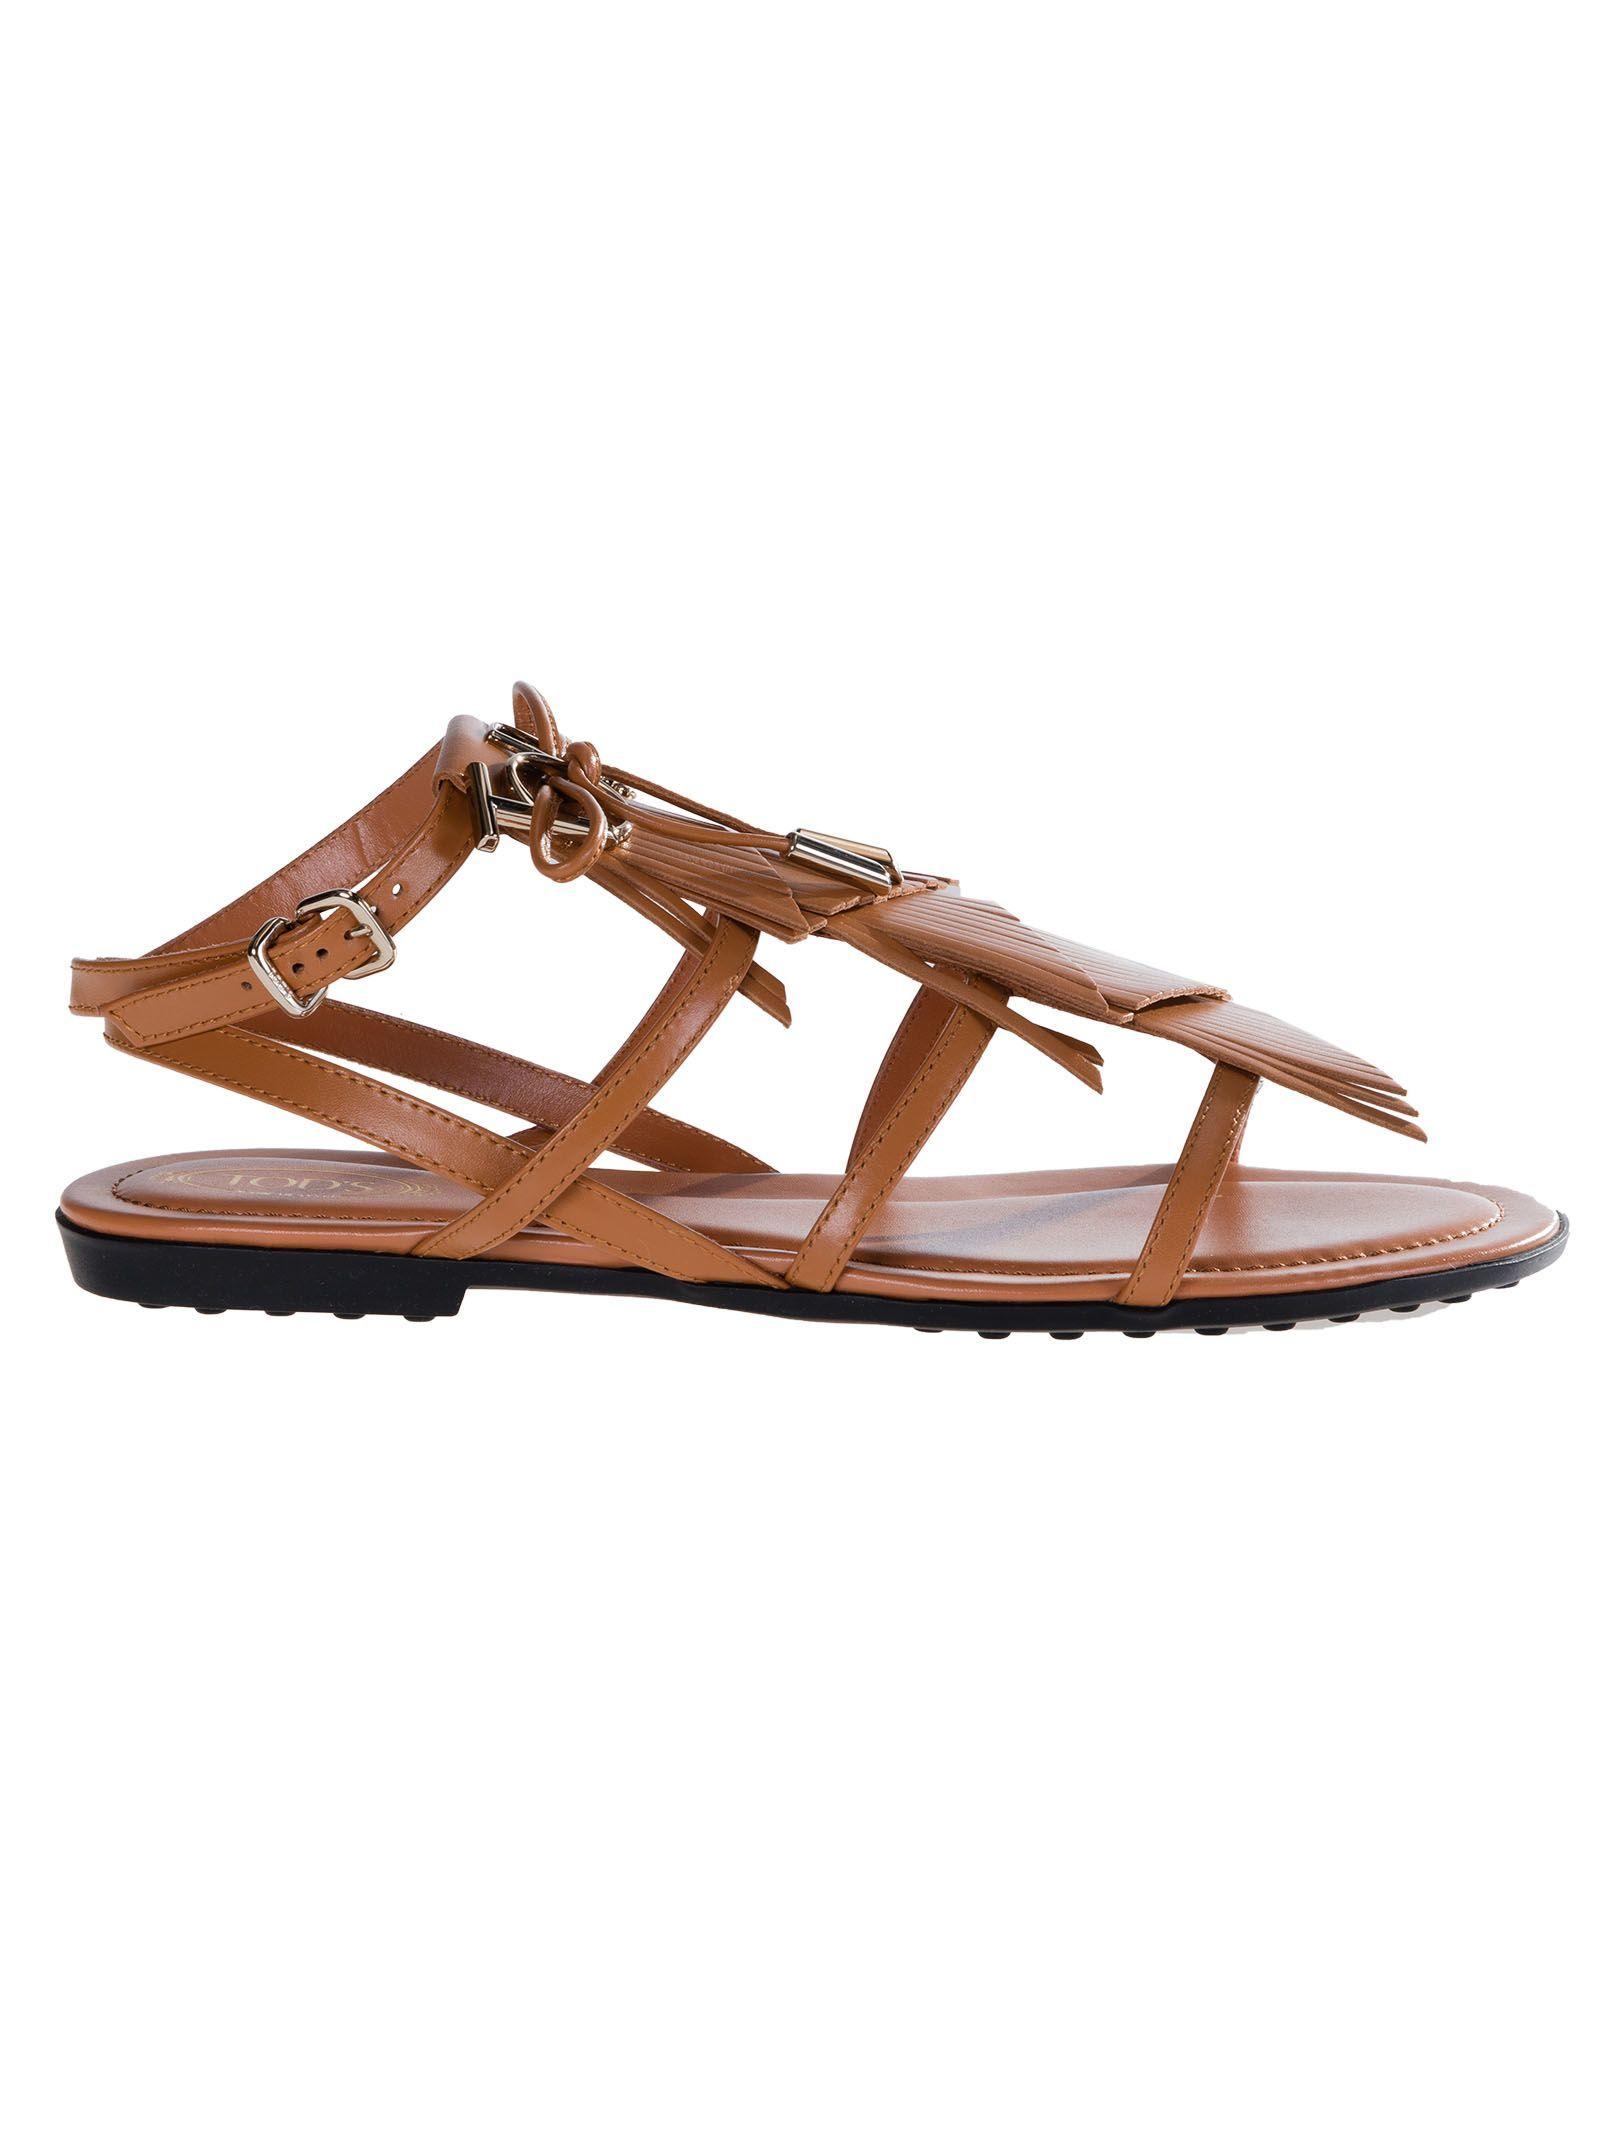 Tod's Logo - TOD'S. Tod's Tod's Logo Fringe Flat Sandals #Shoes #Sandals #TOD'S